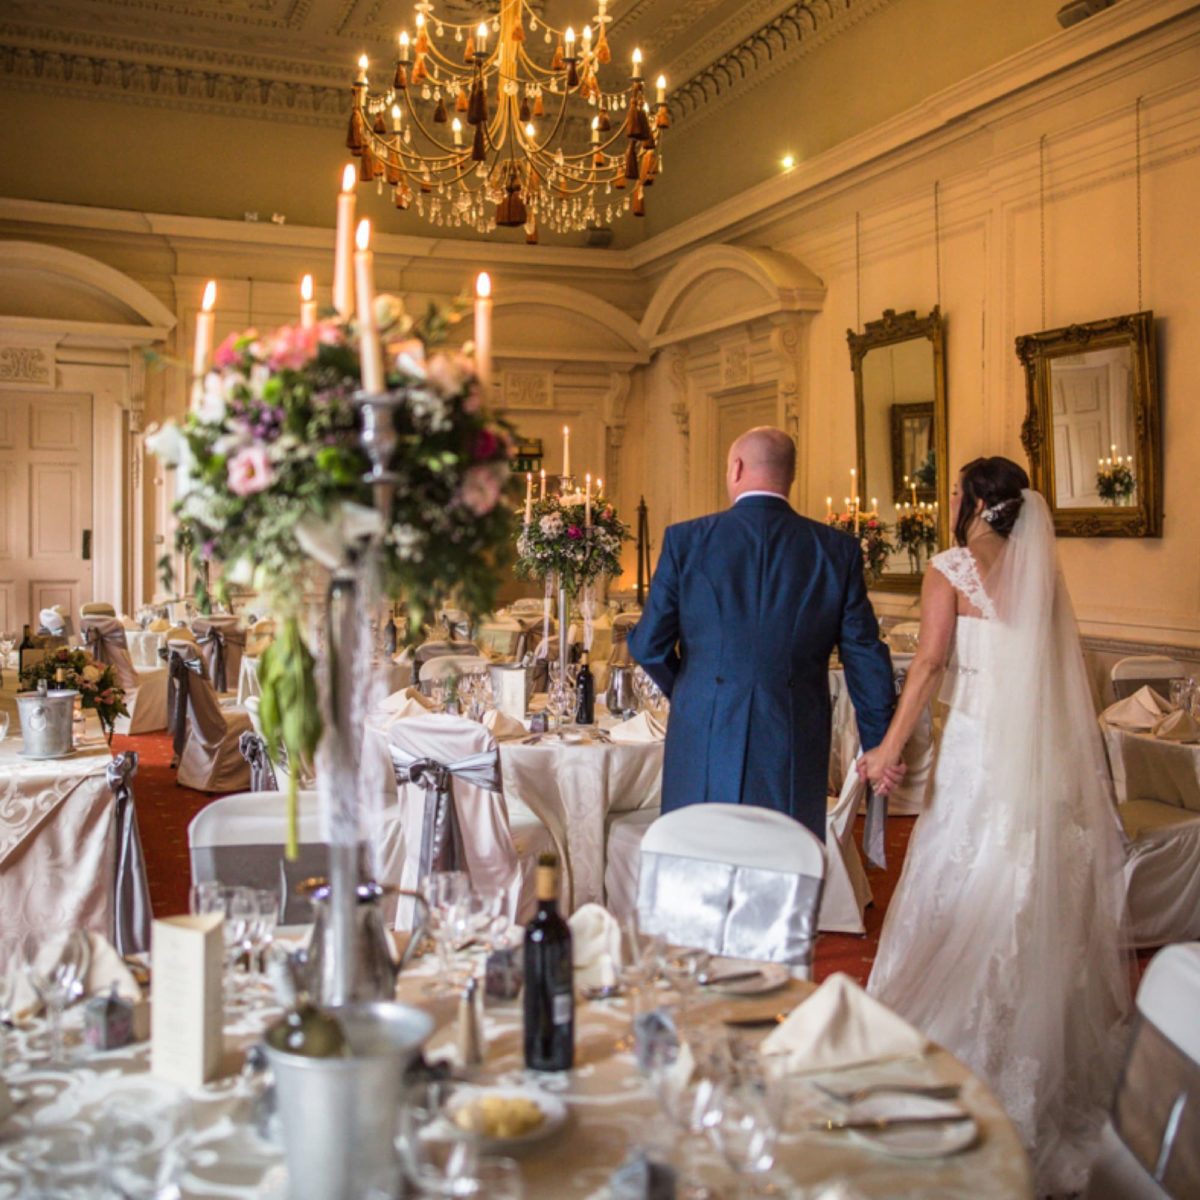 Coombe Abbey Cloisters room weddings